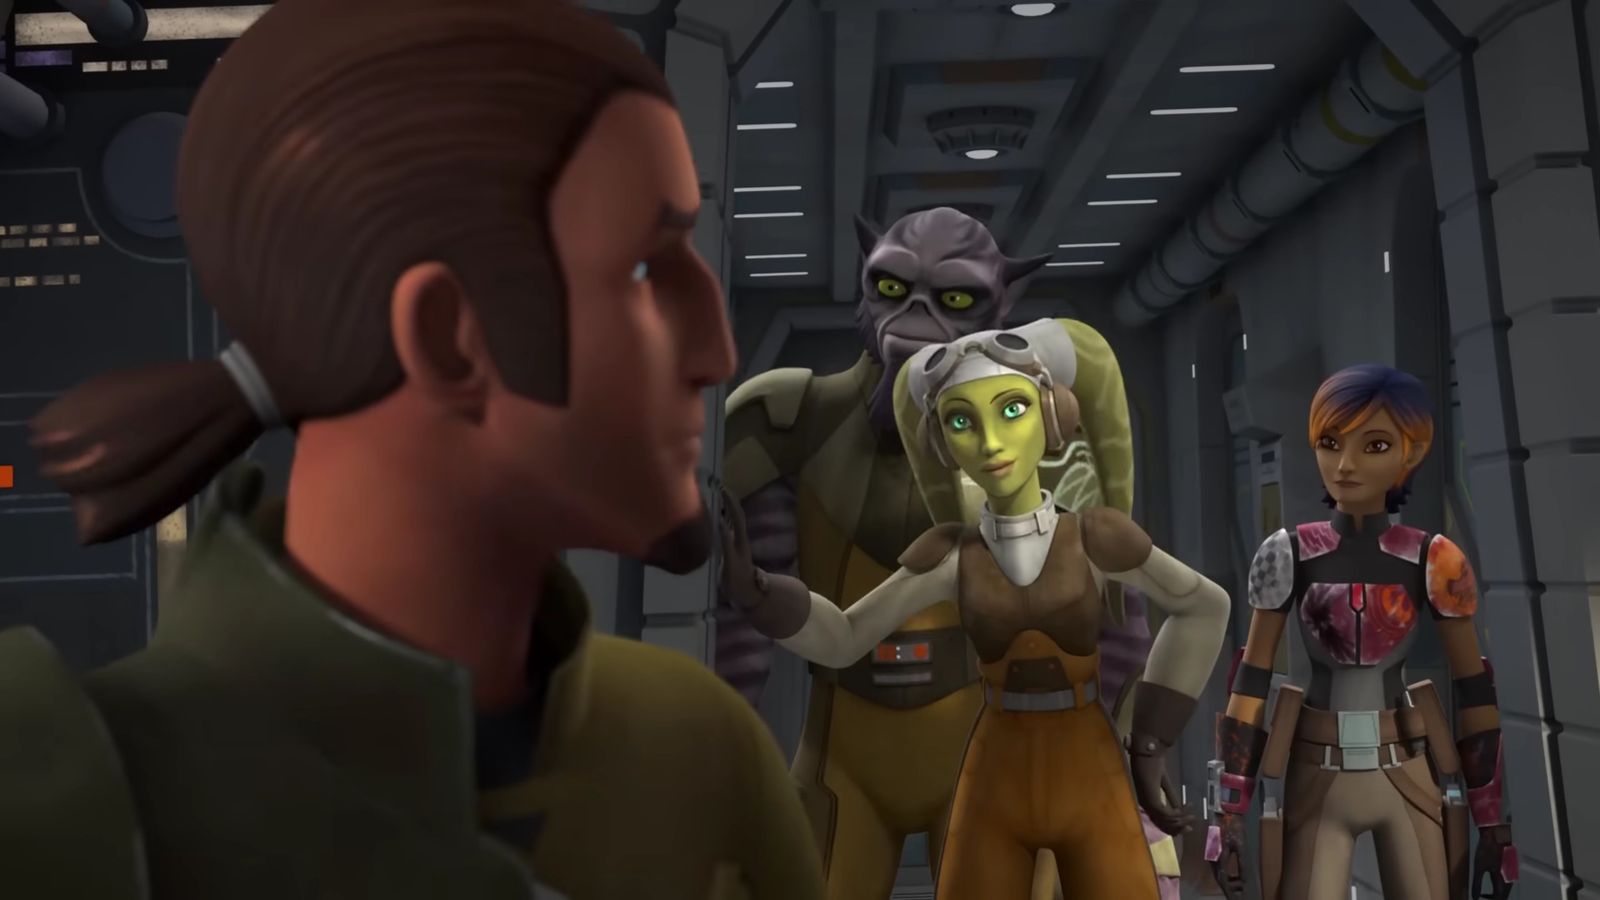 The Rebels from Star Wars: Rebels